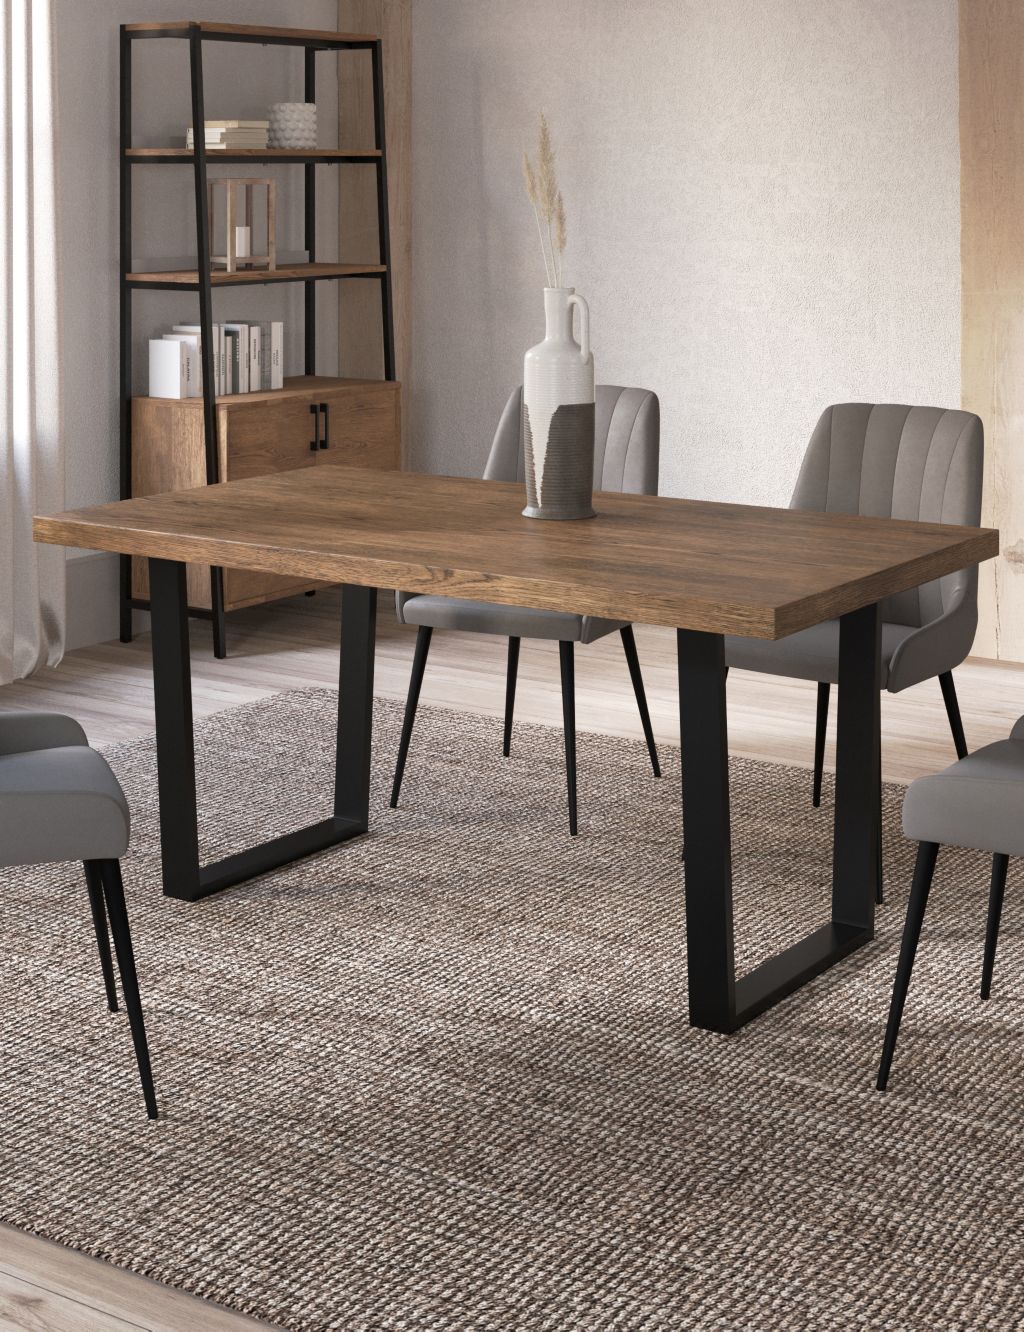 Brookland 6 Seater Dining Table